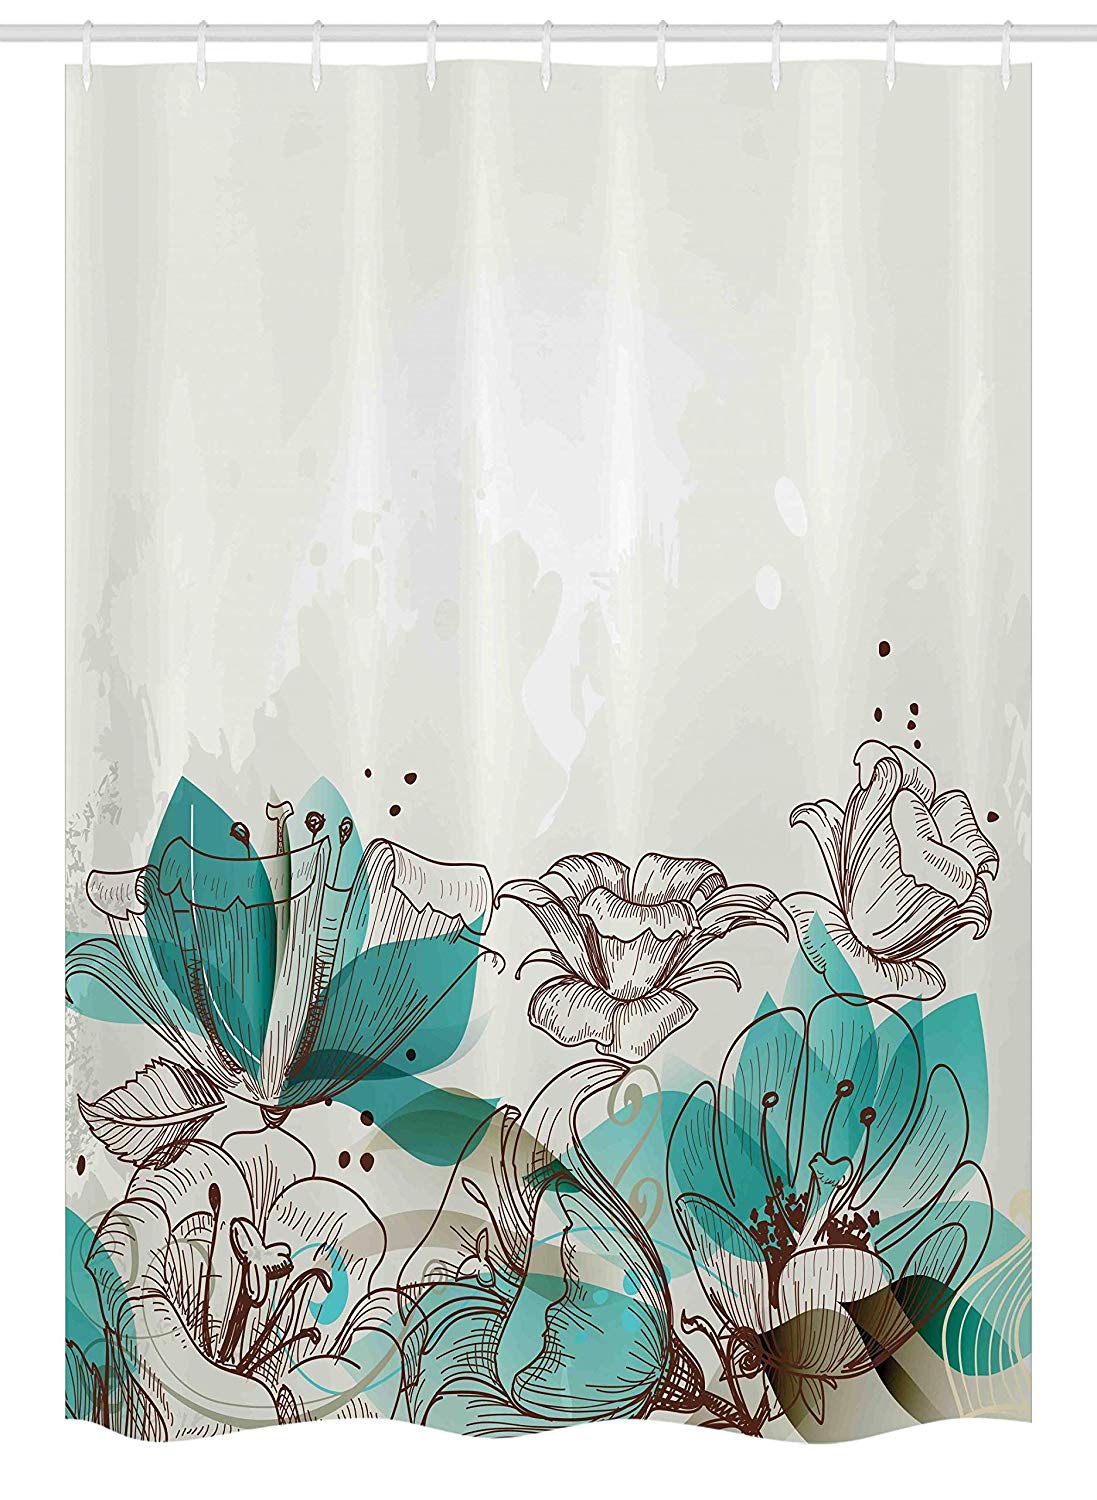 Ambesonne Turquoise Stall Shower Curtain, Retro Floral Background with Hibiscus Silhouettes Dramatic Romantic Nature Art, Fabric Bathroom Decor Set with Hooks, 54" X 78", Beige Teal